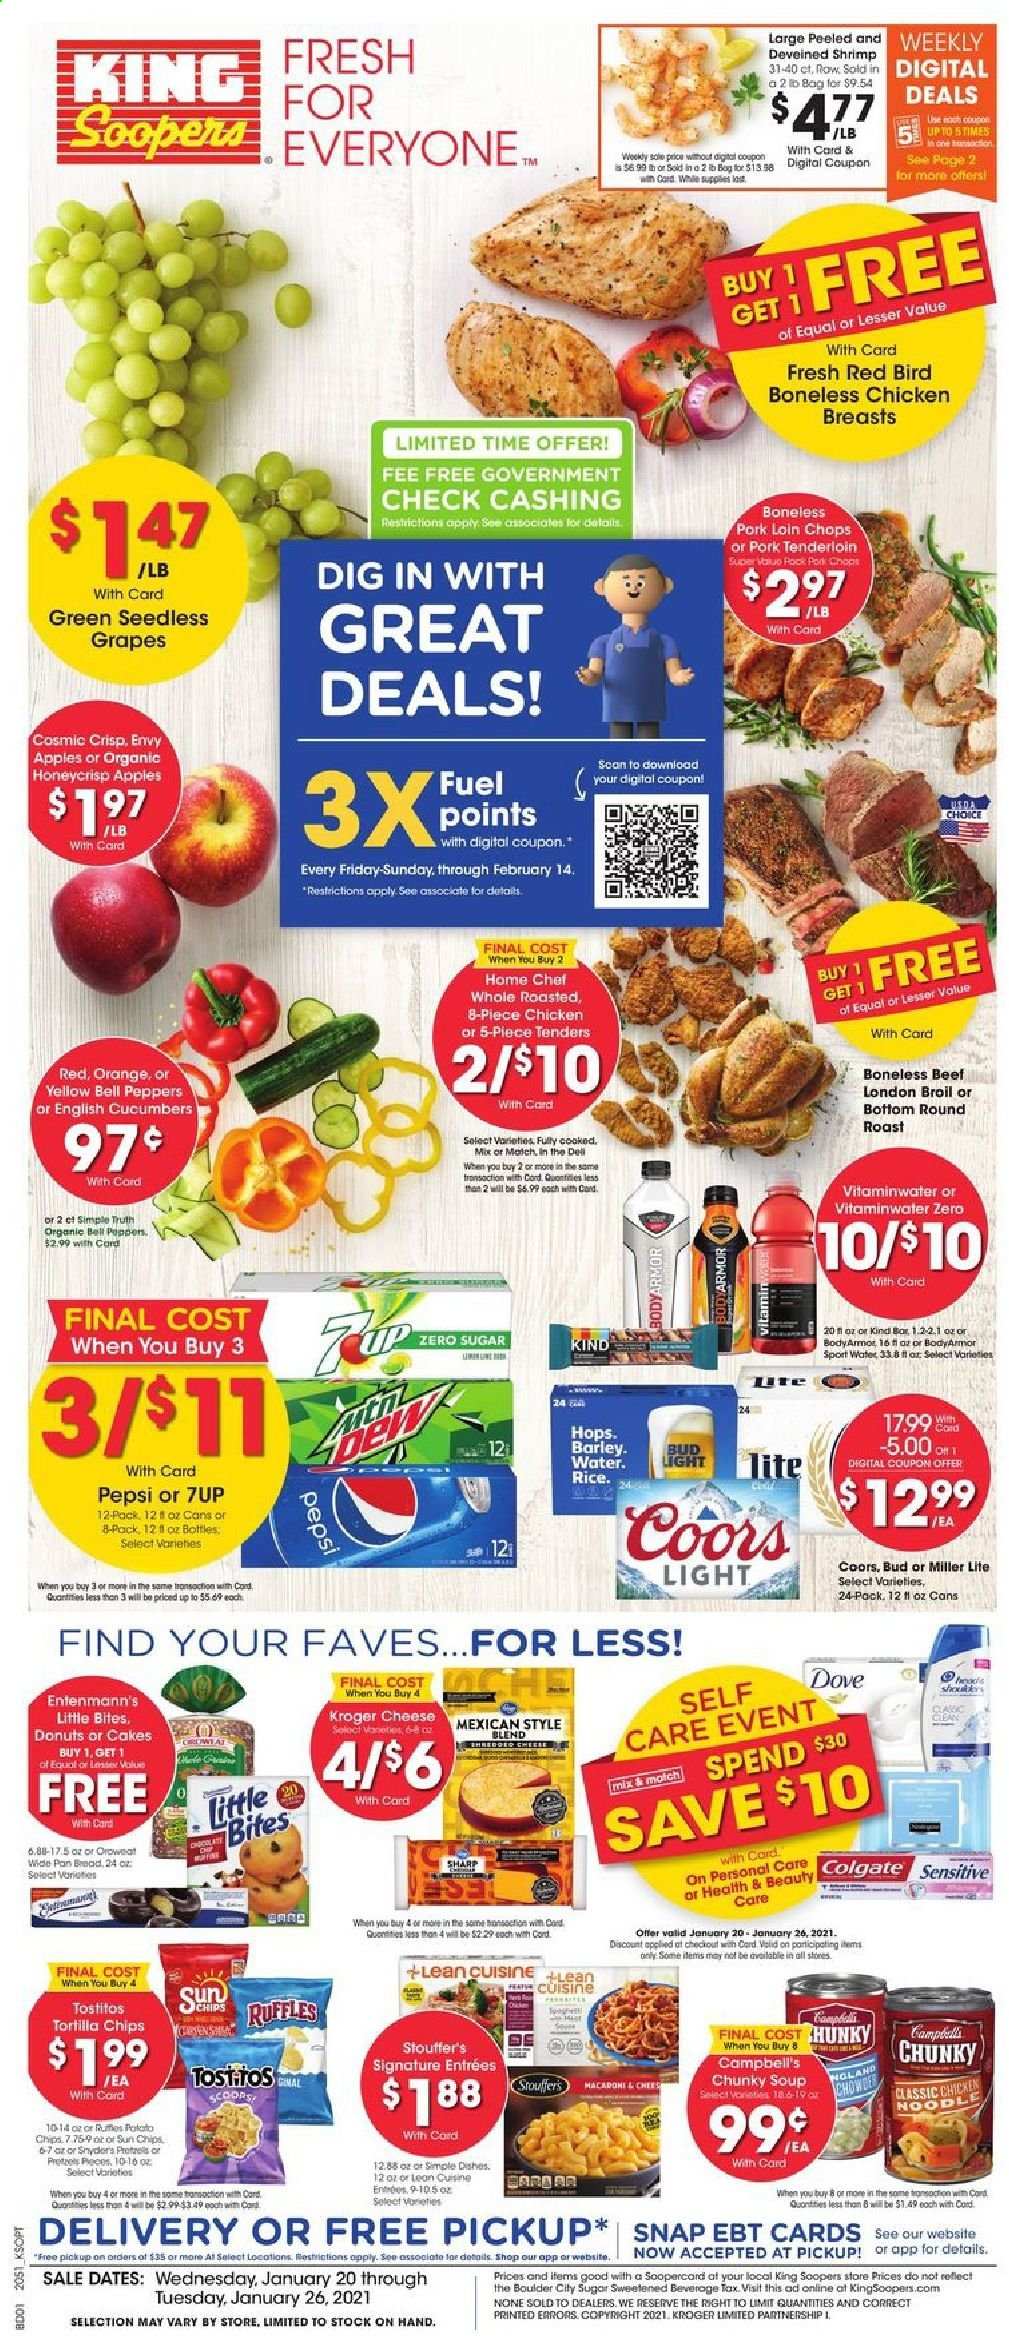 thumbnail - King Soopers Flyer - 01/20/2021 - 01/26/2021 - Sales products - Dell, bread, cake, donut, Entenmann's, Little Bites, apples, shrimps, Campbell's, soup, cheese, bell peppers, Stouffer's, tortilla chips, chips, Ruffles, Tostitos, cucumber, macaroni, noodles, Pepsi, 7UP, L'Or, beer, Miller Lite, Coors, Bud Light, chicken breasts, beef meat, round roast, pork chops, pork loin, pork meat, pork tenderloin, Dove, Colgate, Sharp, bag. Page 1.